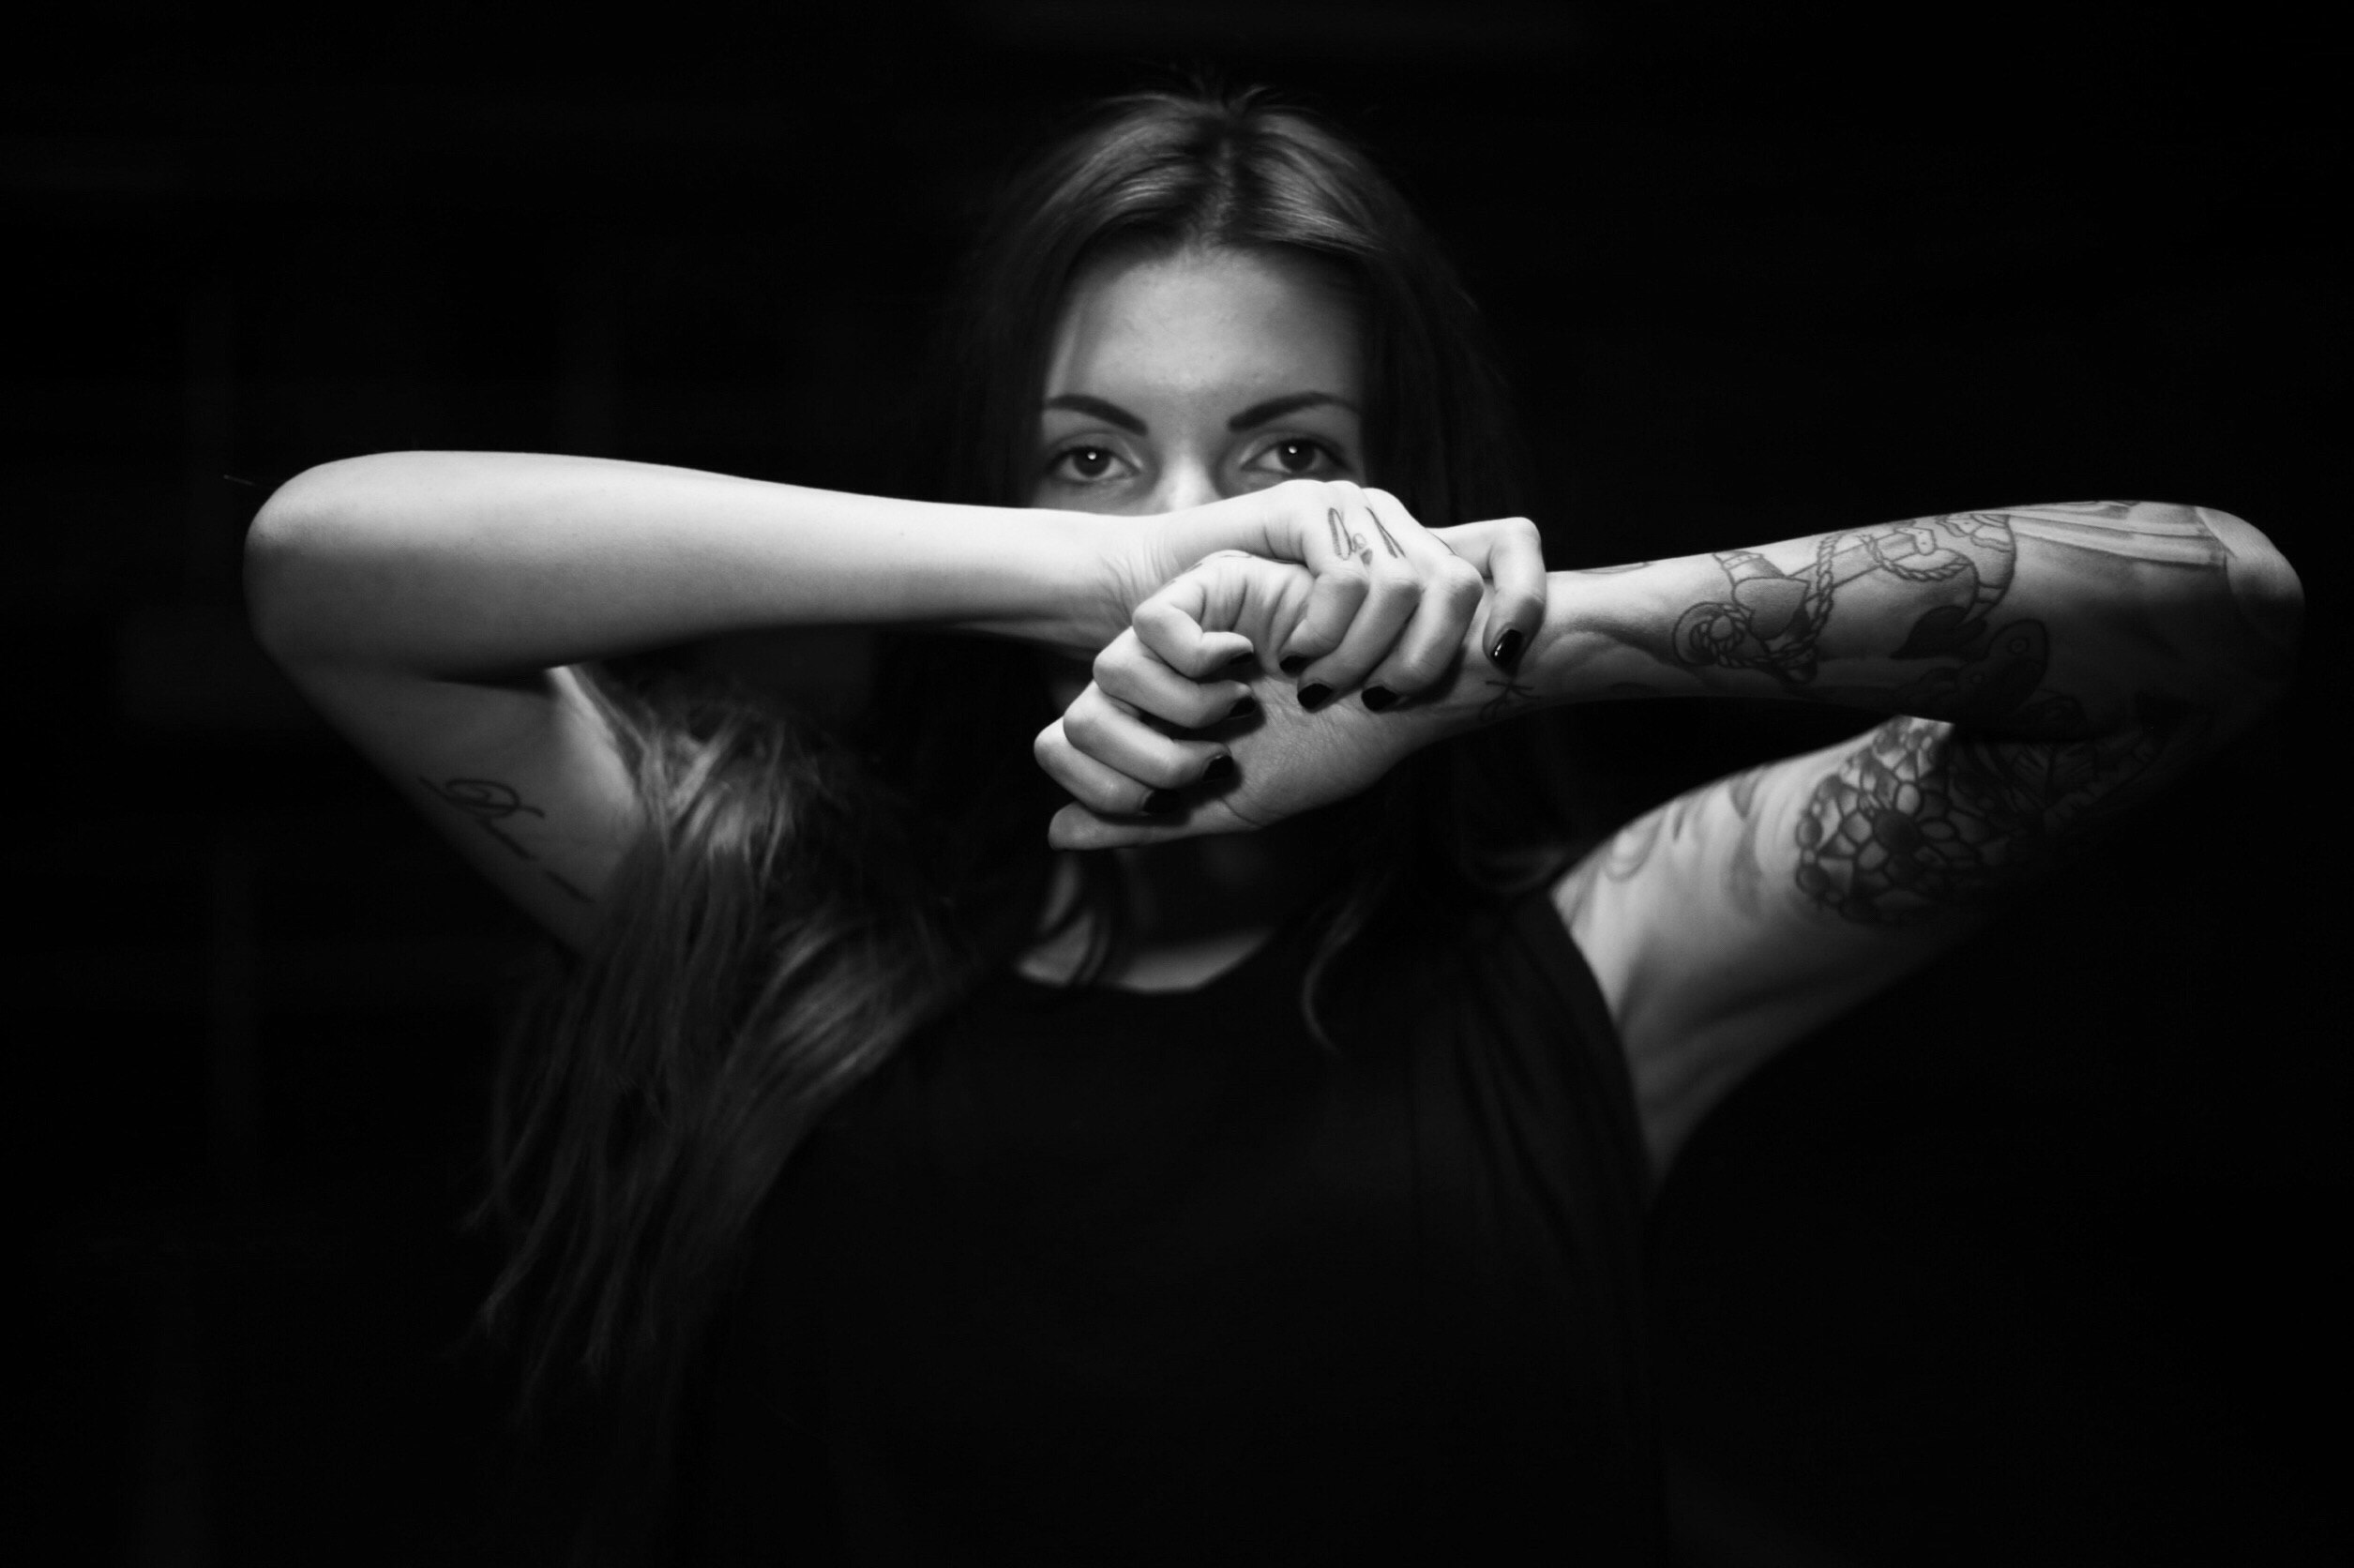 Women Model Monochrome Arms Up Tattoo Hands Crossed Looking At Viewer Brunette Painted Nails Black N 2510x1672